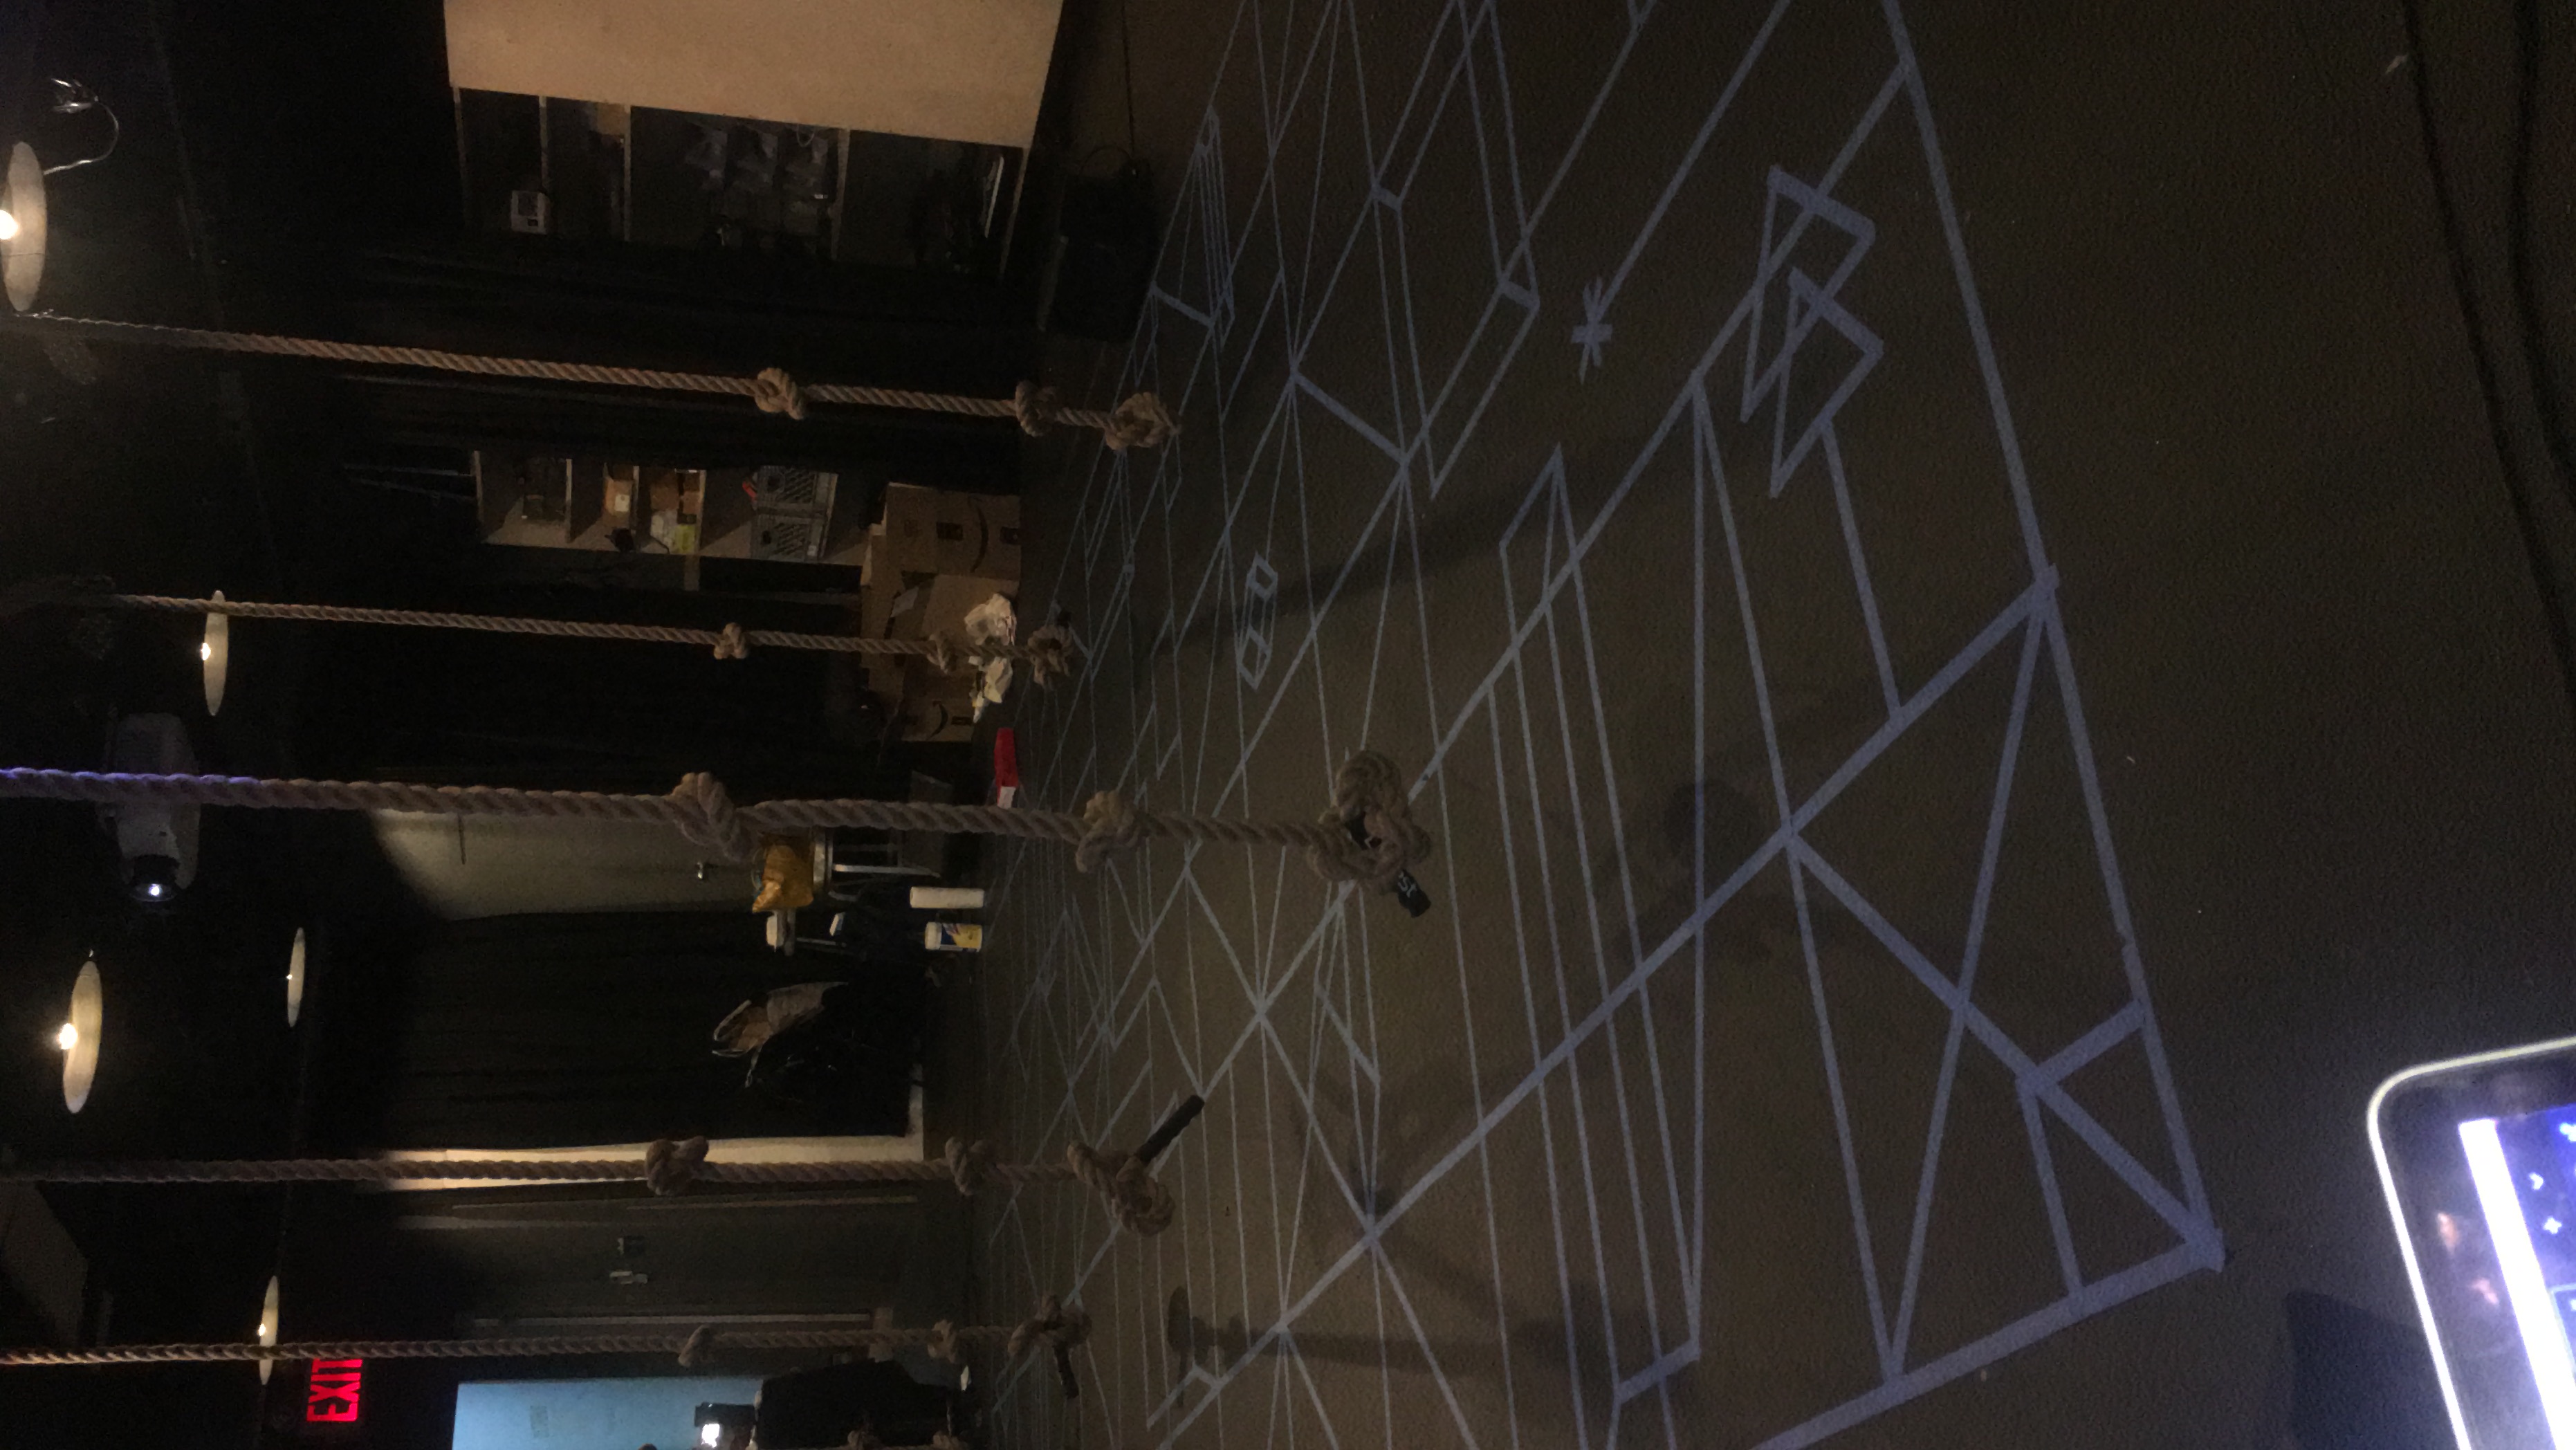  Photo. Small performance space, walls and floor painted black. In center is a blue floor design based in rhythmmetrics, sacred geometry, and hop scotch. Hanging from the cieling, over the floor design are 5 knotted climbing ropes. 